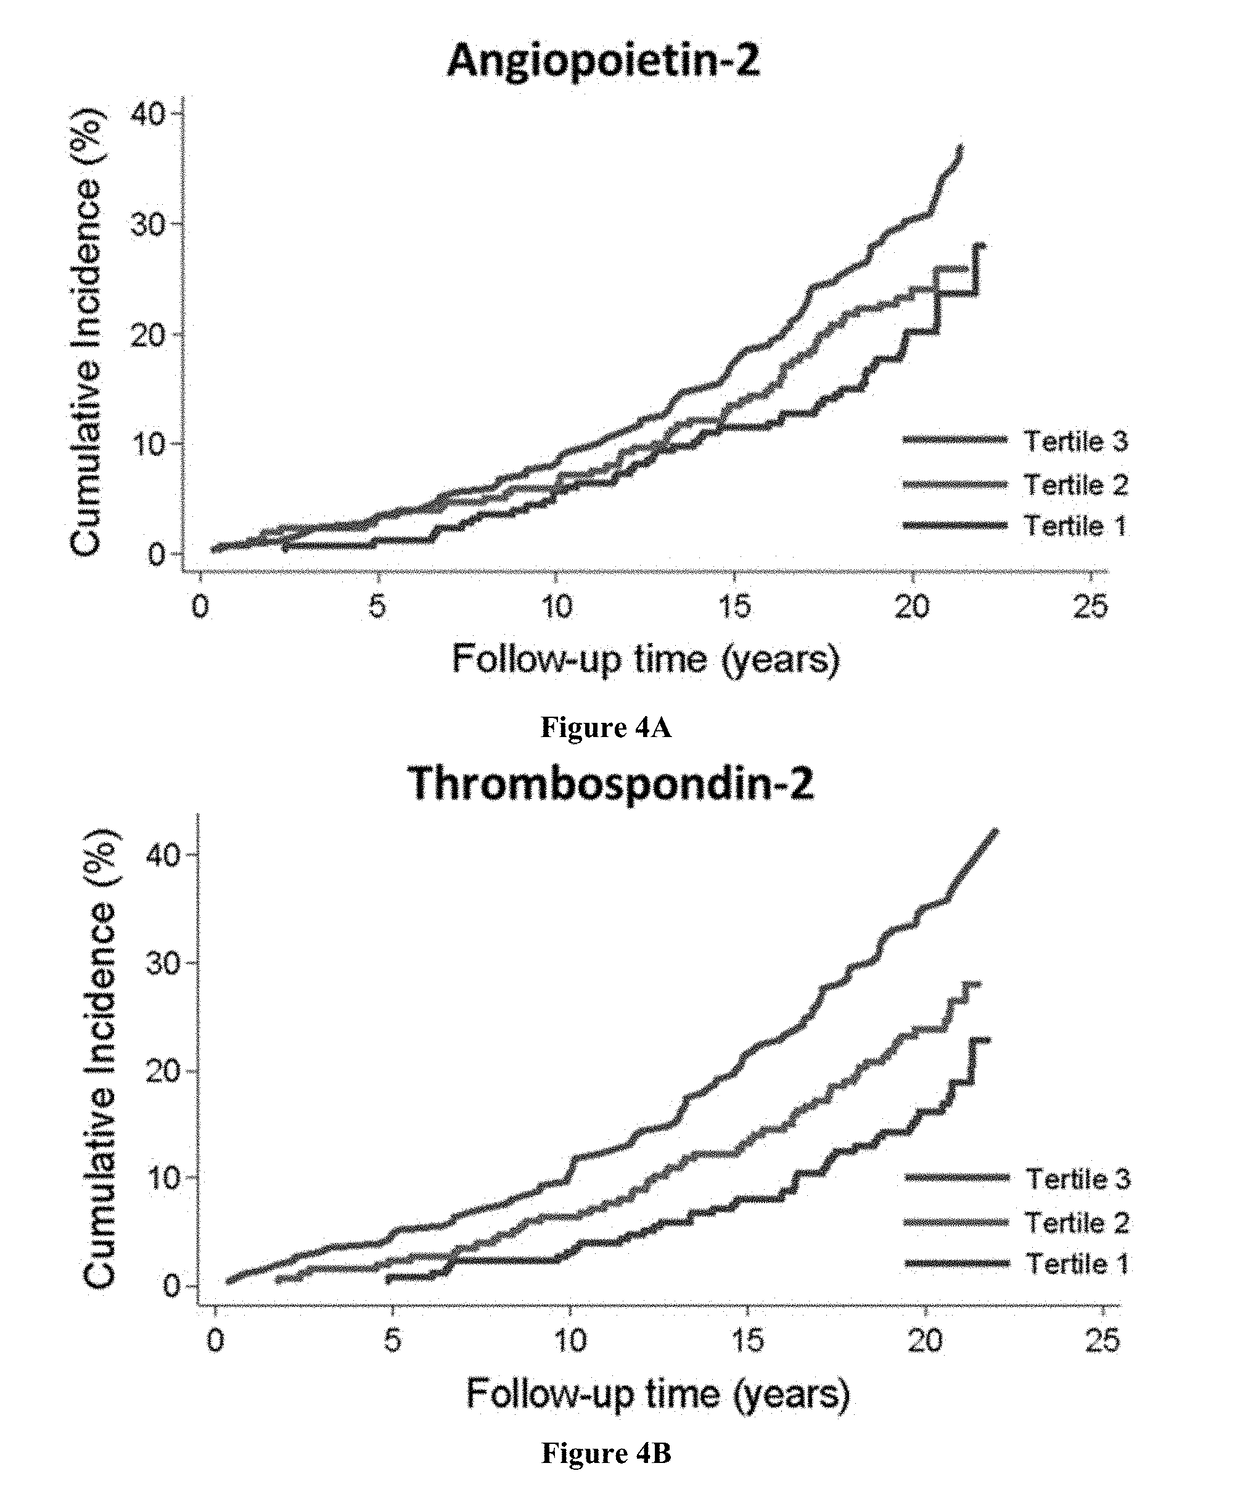 Detection of angiopoietin-2 and thrombospondin-2 in connection with diagnosing acute heart failure